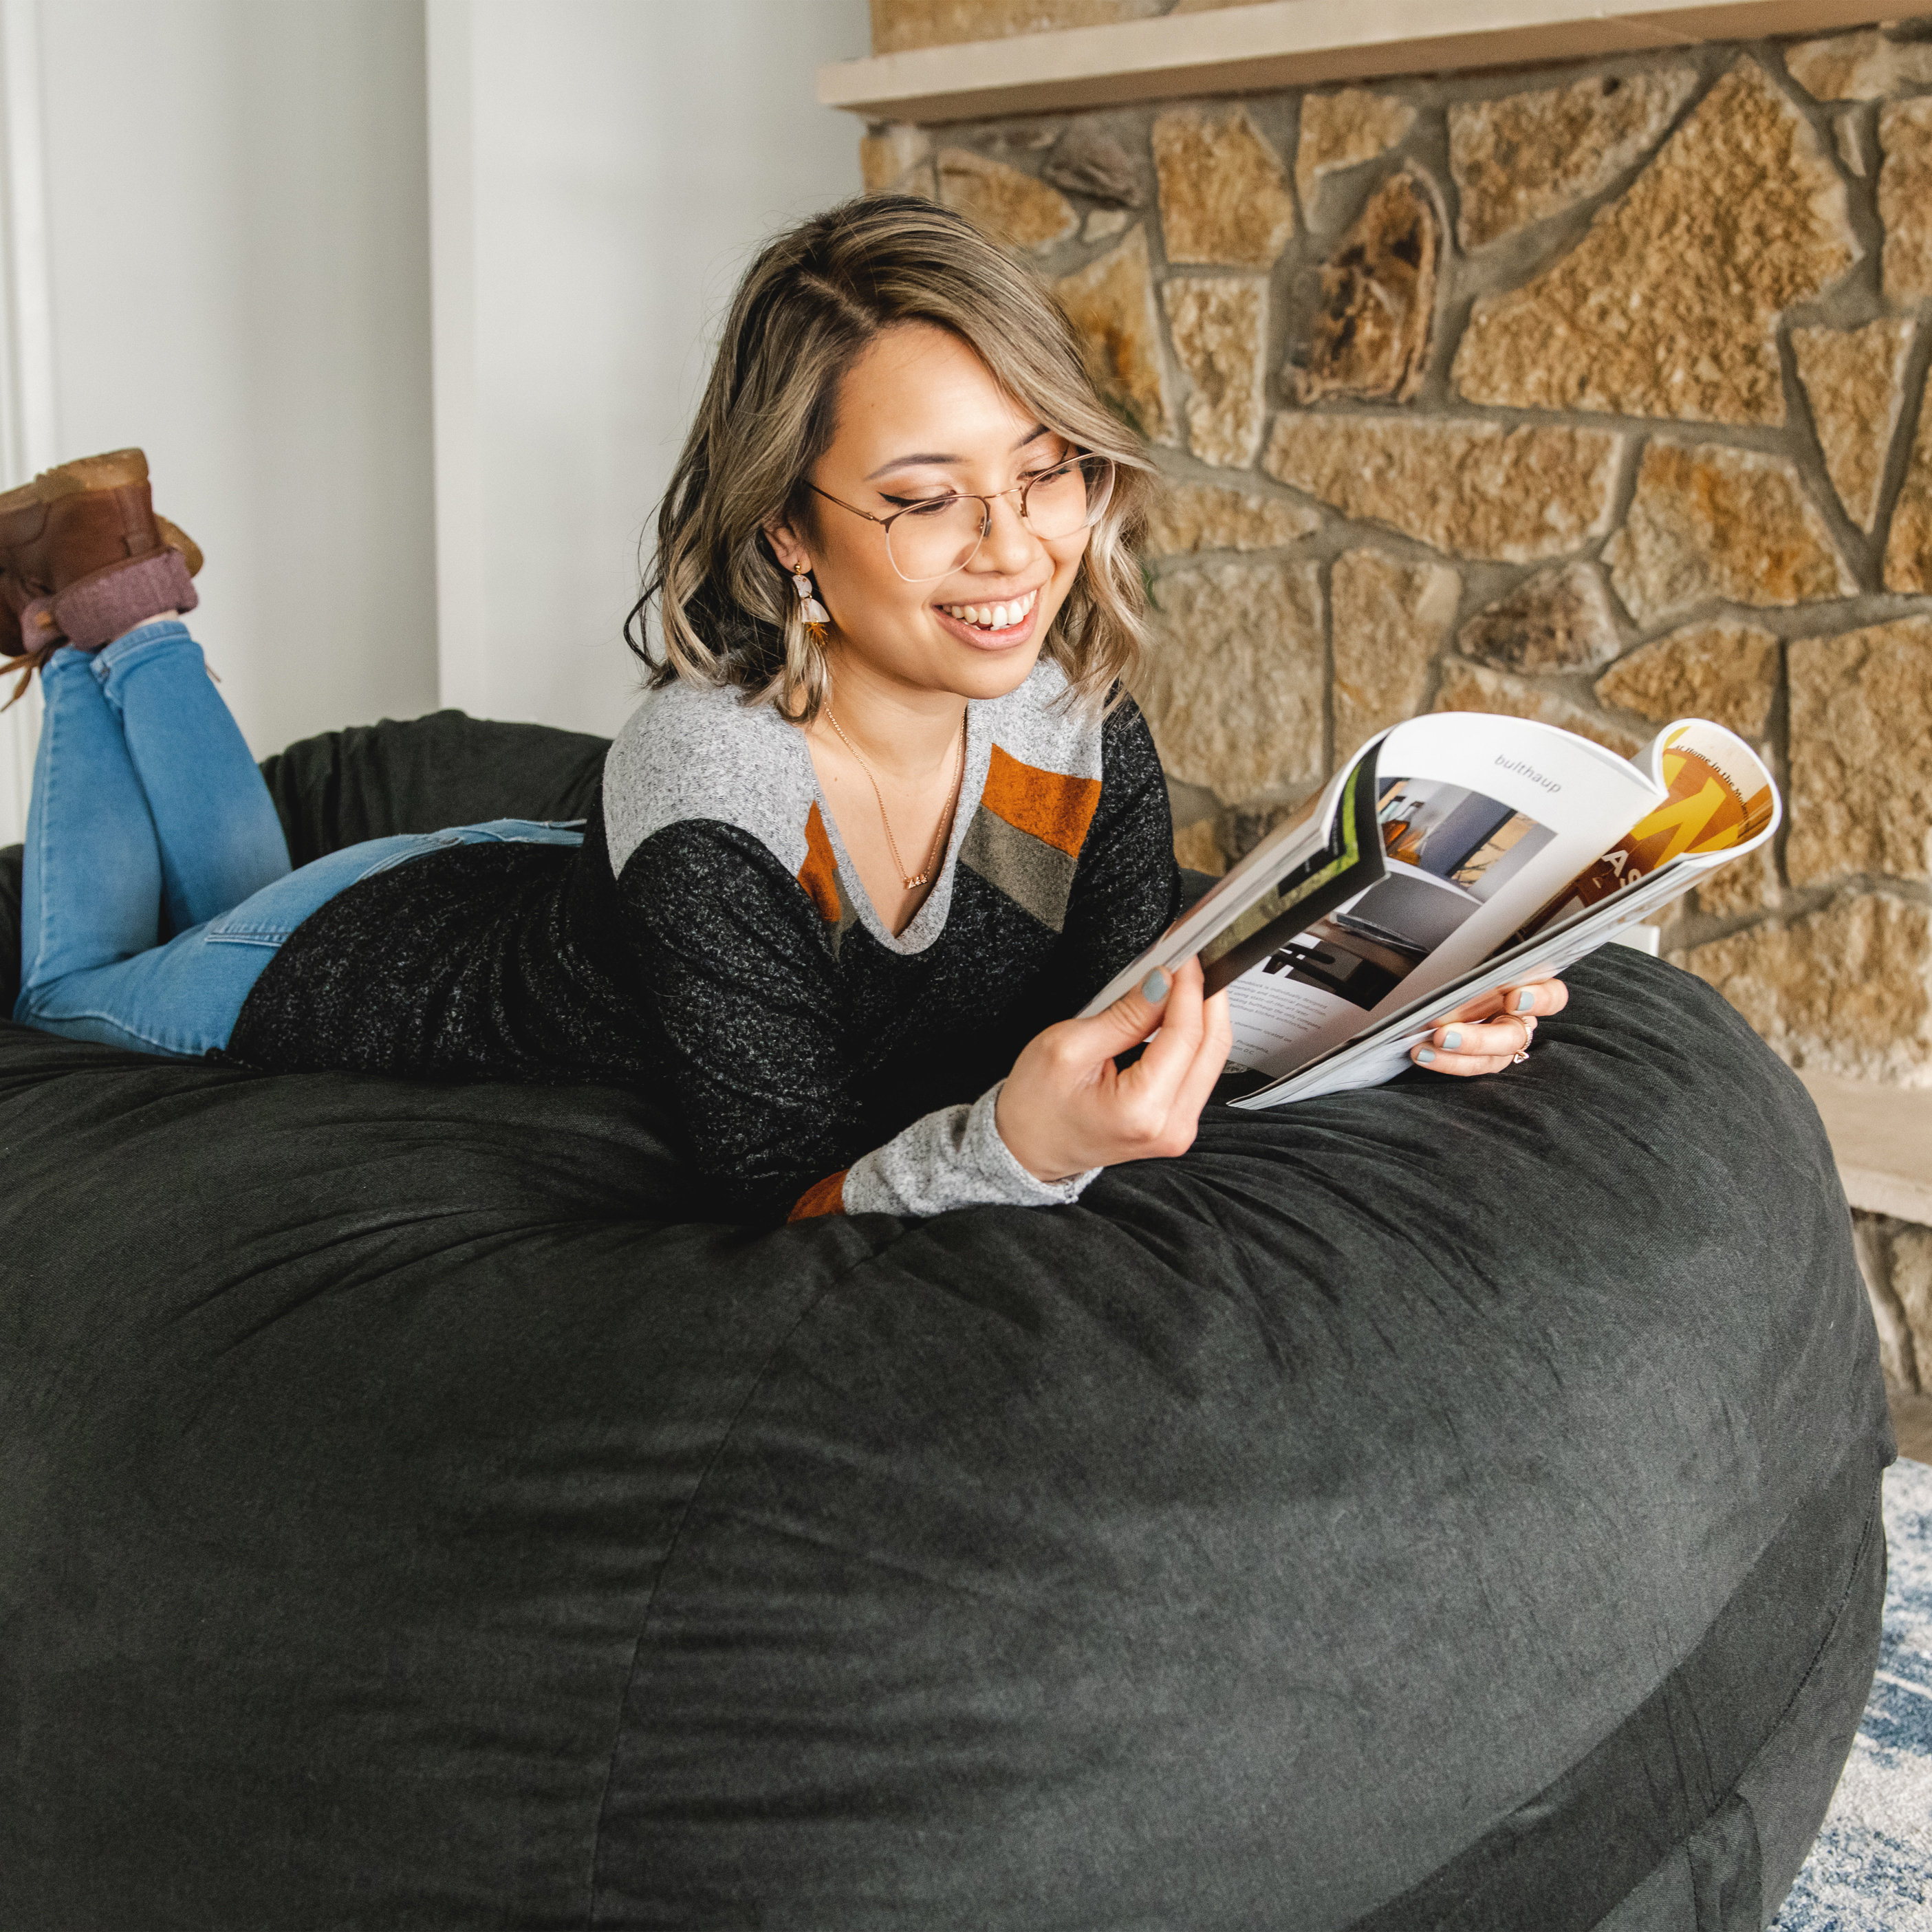 Affordable, High Quality Bean Bag Chairs | Ultimate Sack